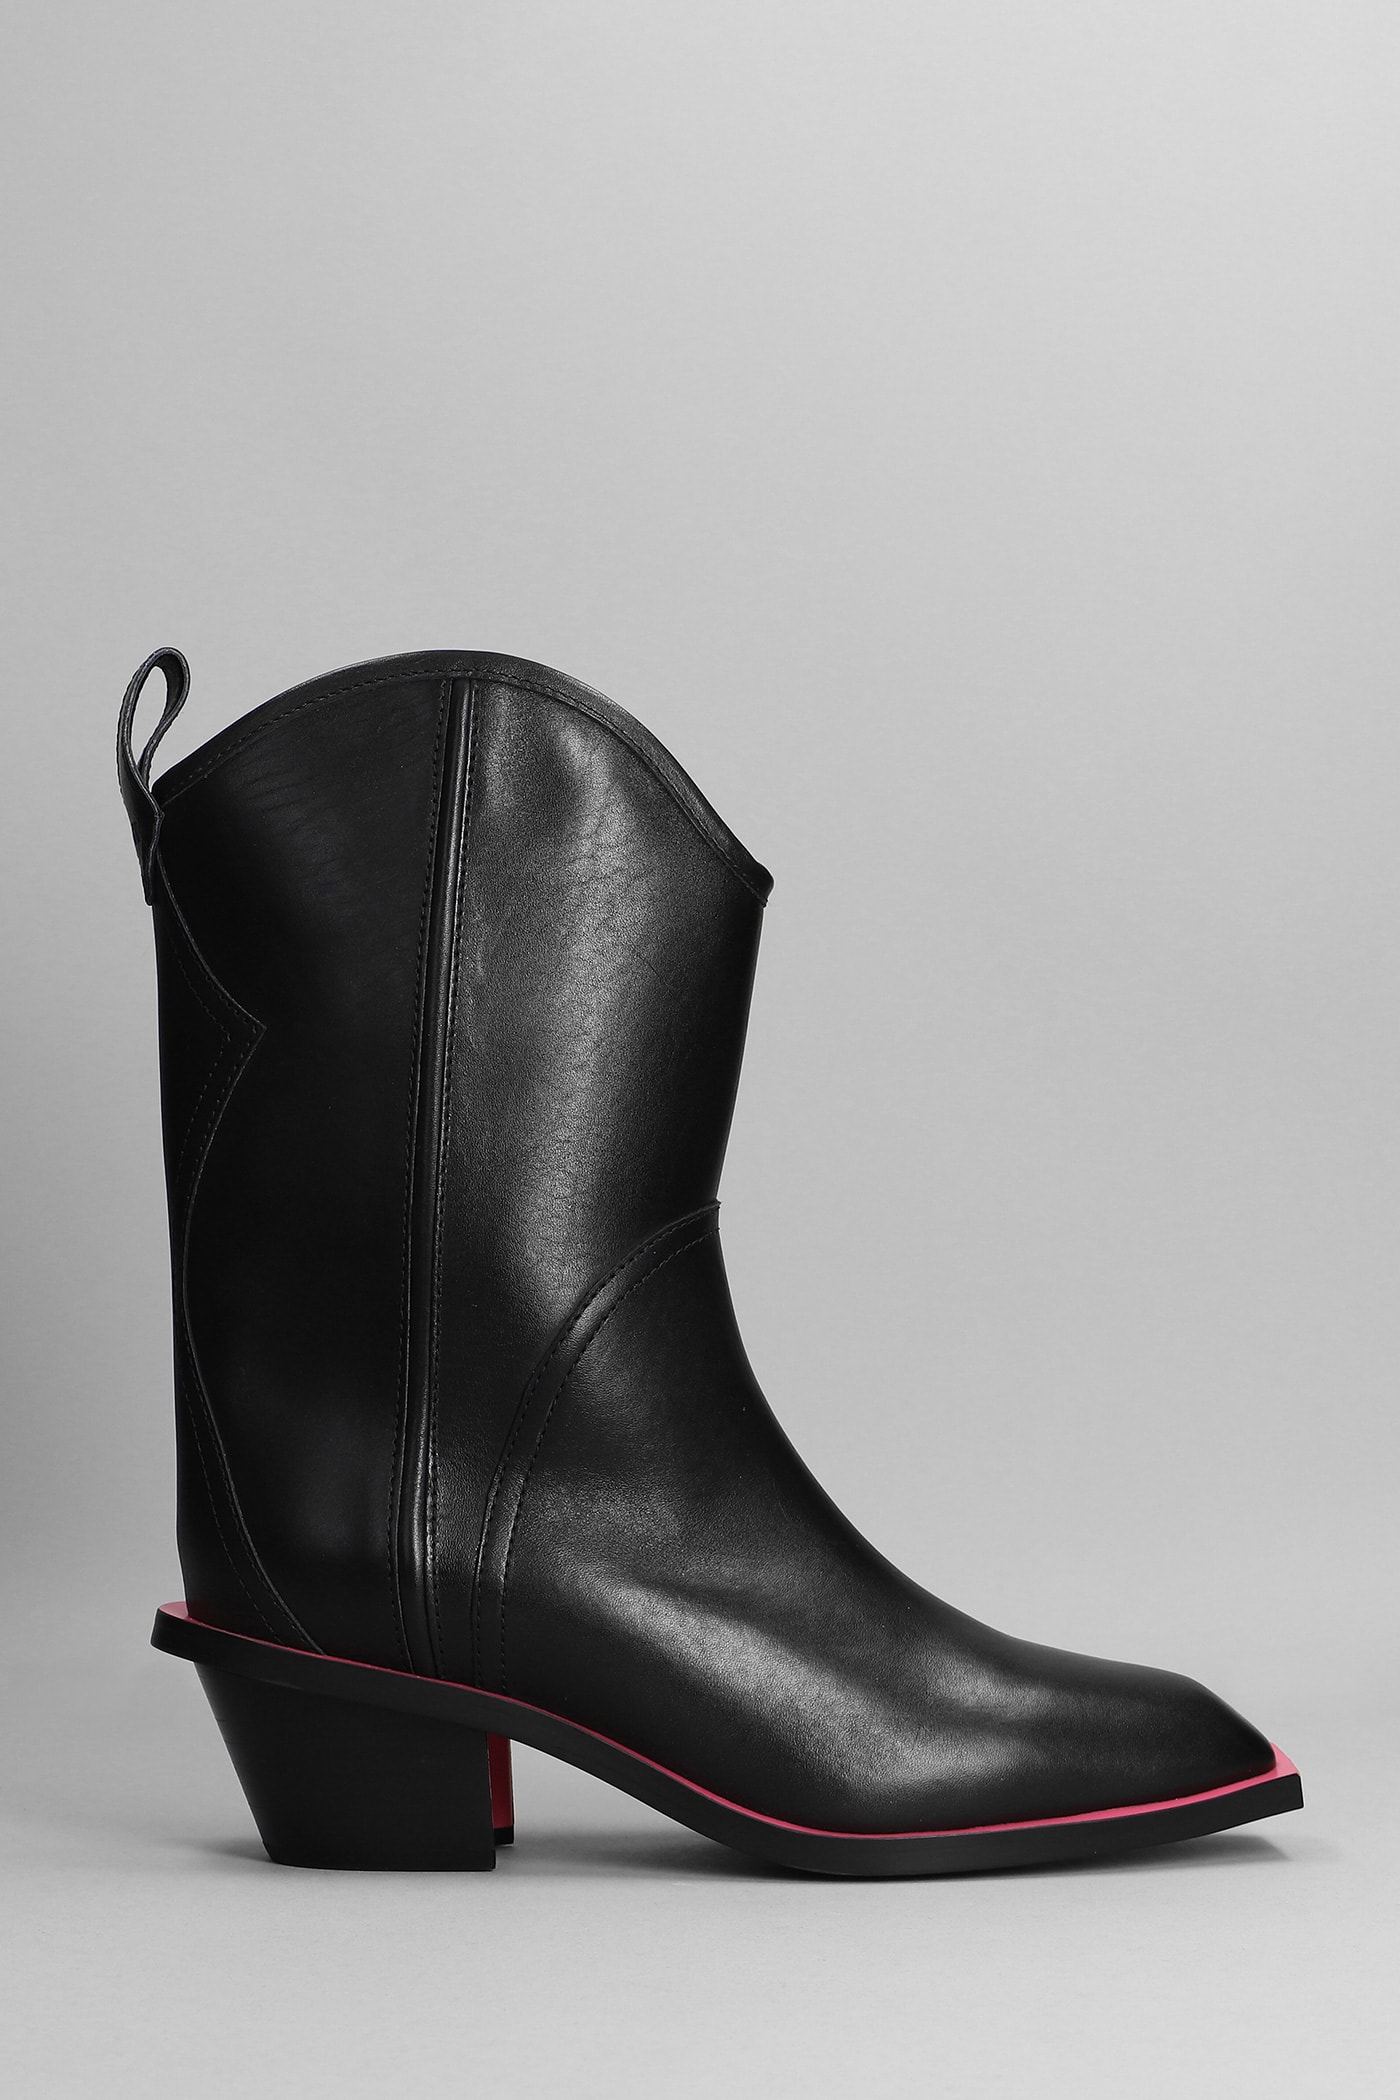 MSGM Texan Ankle Boots In Black Leather